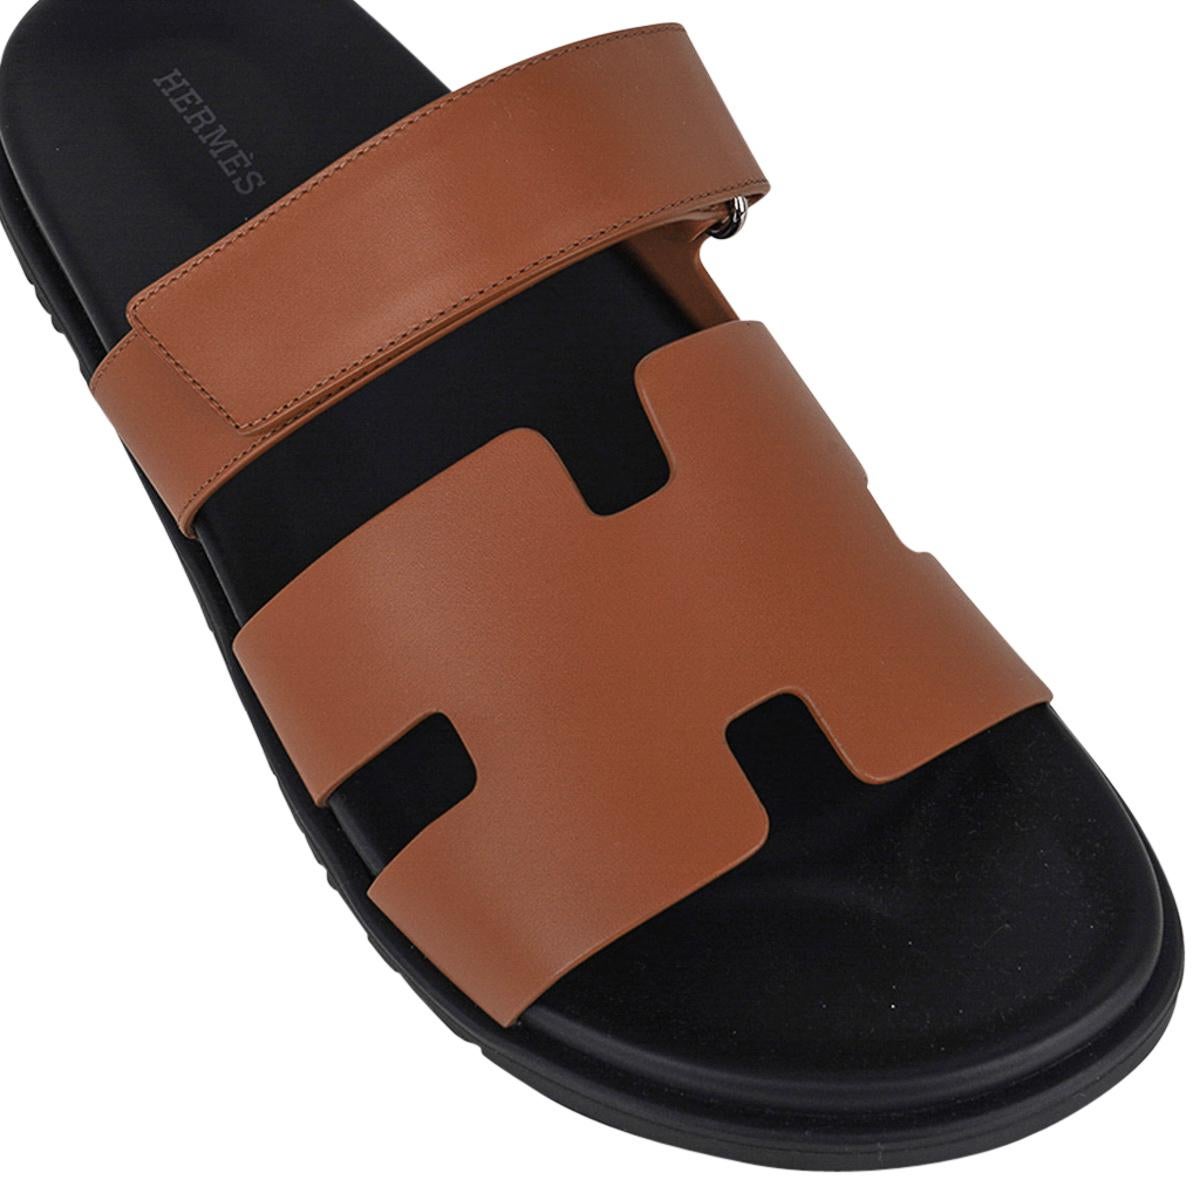 Mightychic offers an Hermes Men's Chypre Sandal featured in Naturel Safari.
Calfskin with black anatomical insole and H embossed Black rubber sole.
Comfortable and neutral, this sandal will work with a myriad of pieces in your wardrobe.
Strap across